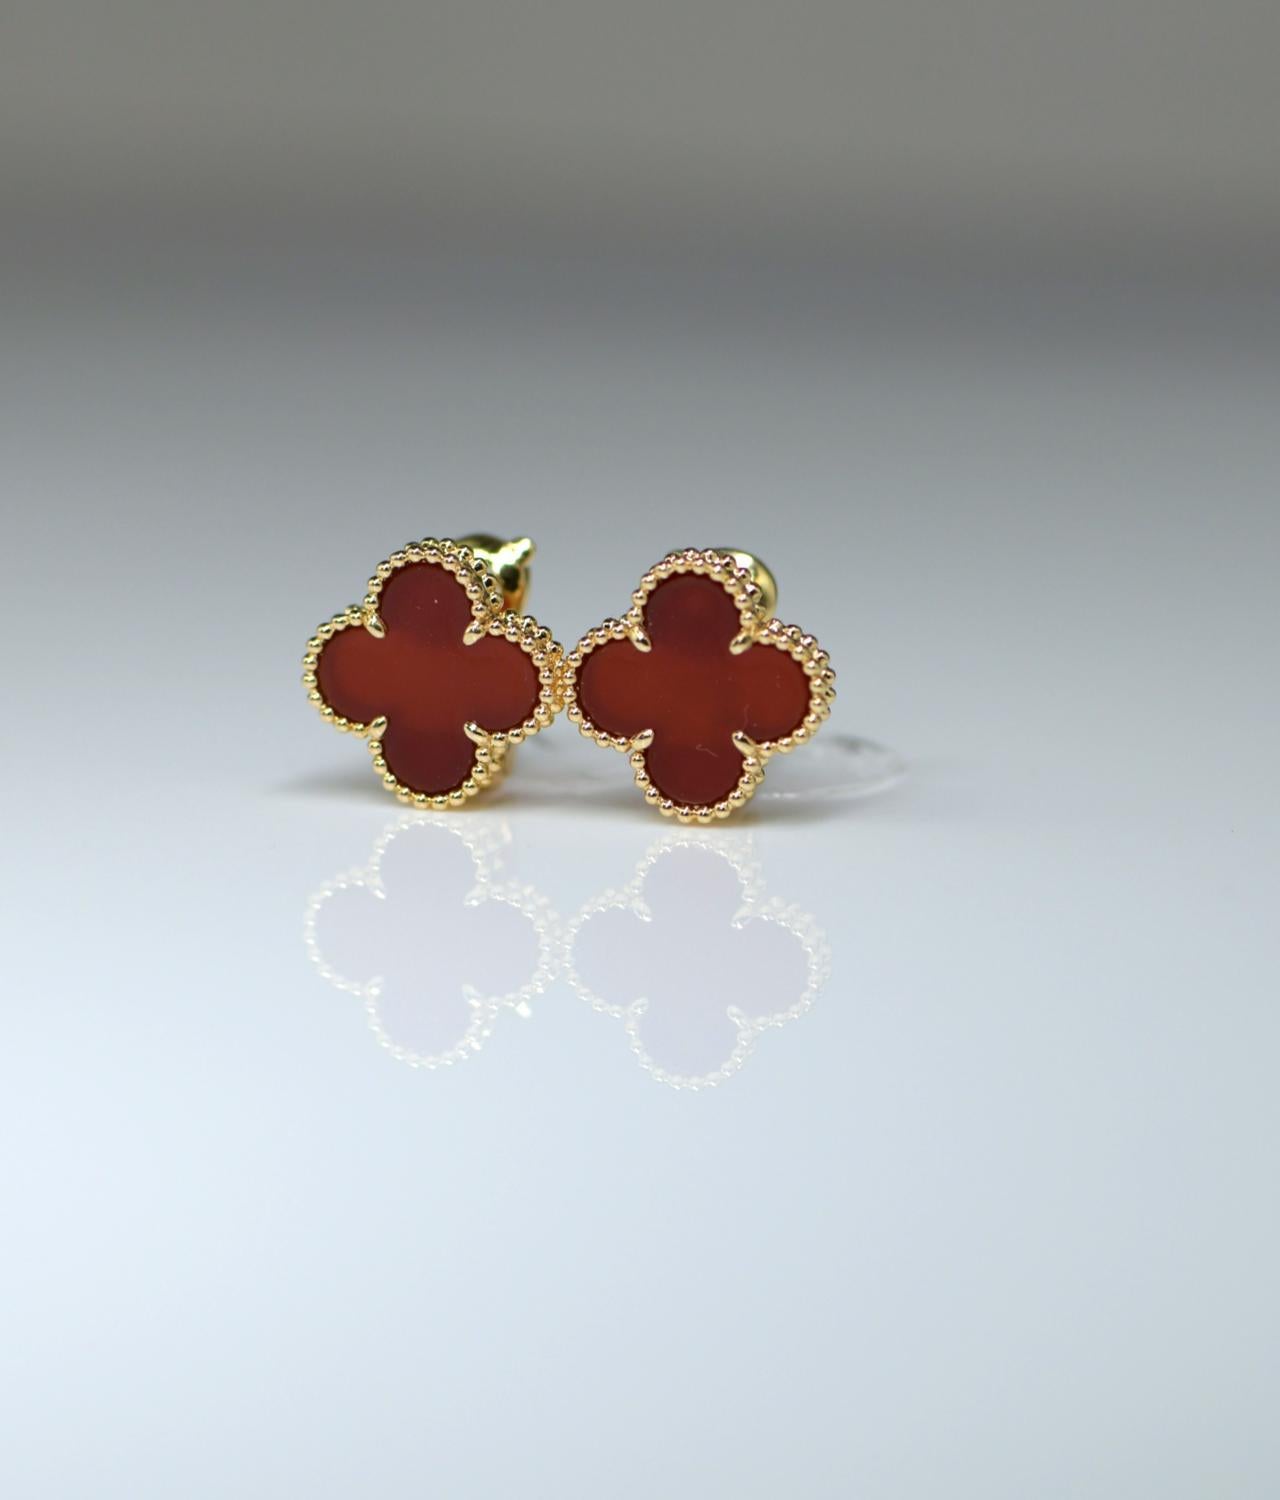 Classic Van Cleef & Arpels carnelian Alhambra earrings. The carnelian is set in 18 karat yellow gold. It is in perfect condition. This piece at this price is something you should snap up while you can.

These are sure to become a staple of your